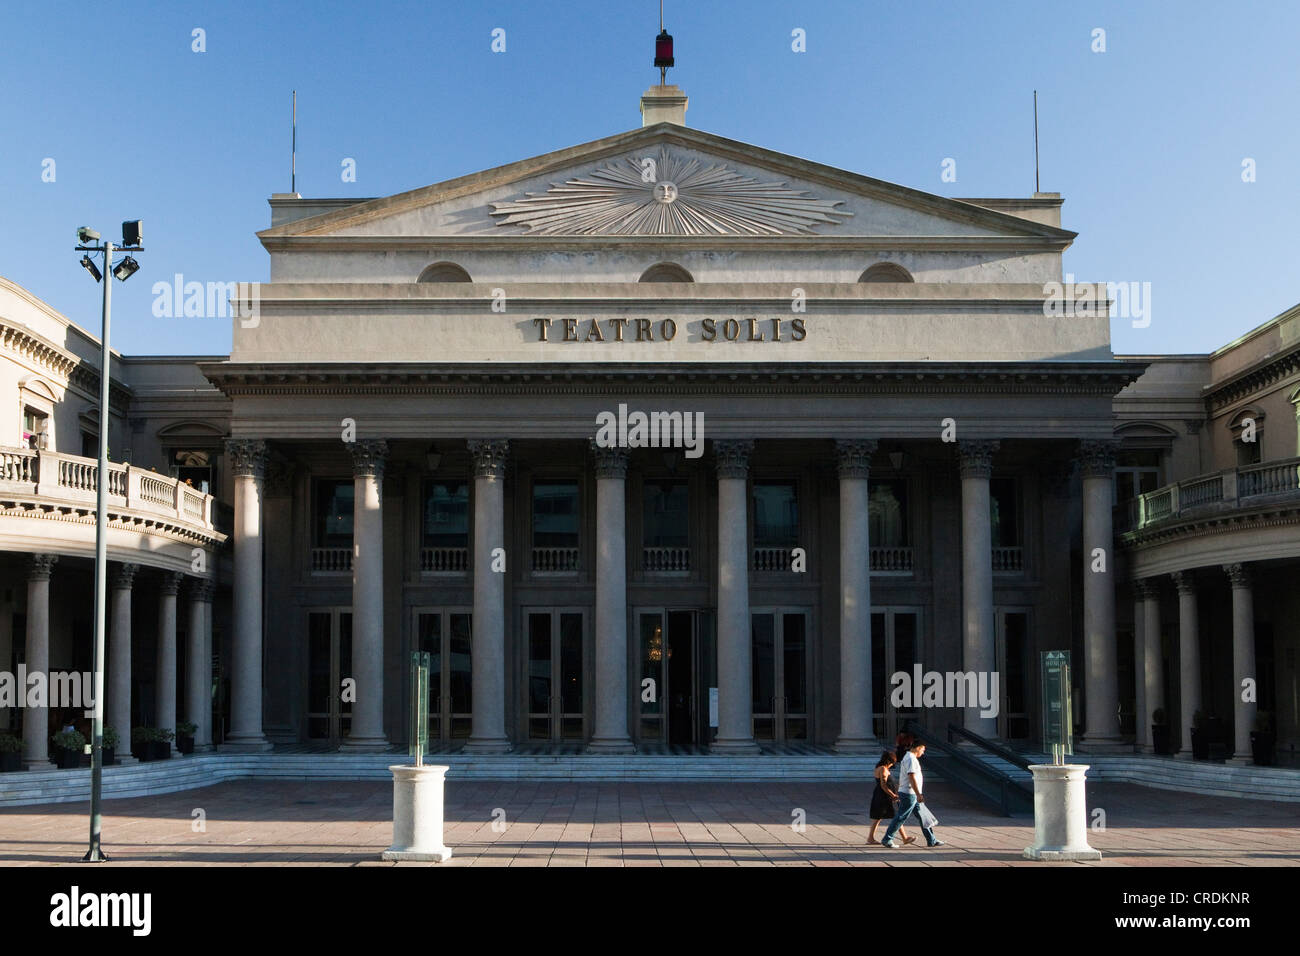 Teatro Solis, Solis Theatre, the oldest theater in Uruguay, built in 1856, at the Plaza Independencia, Montevideo, Uruguay Stock Photo